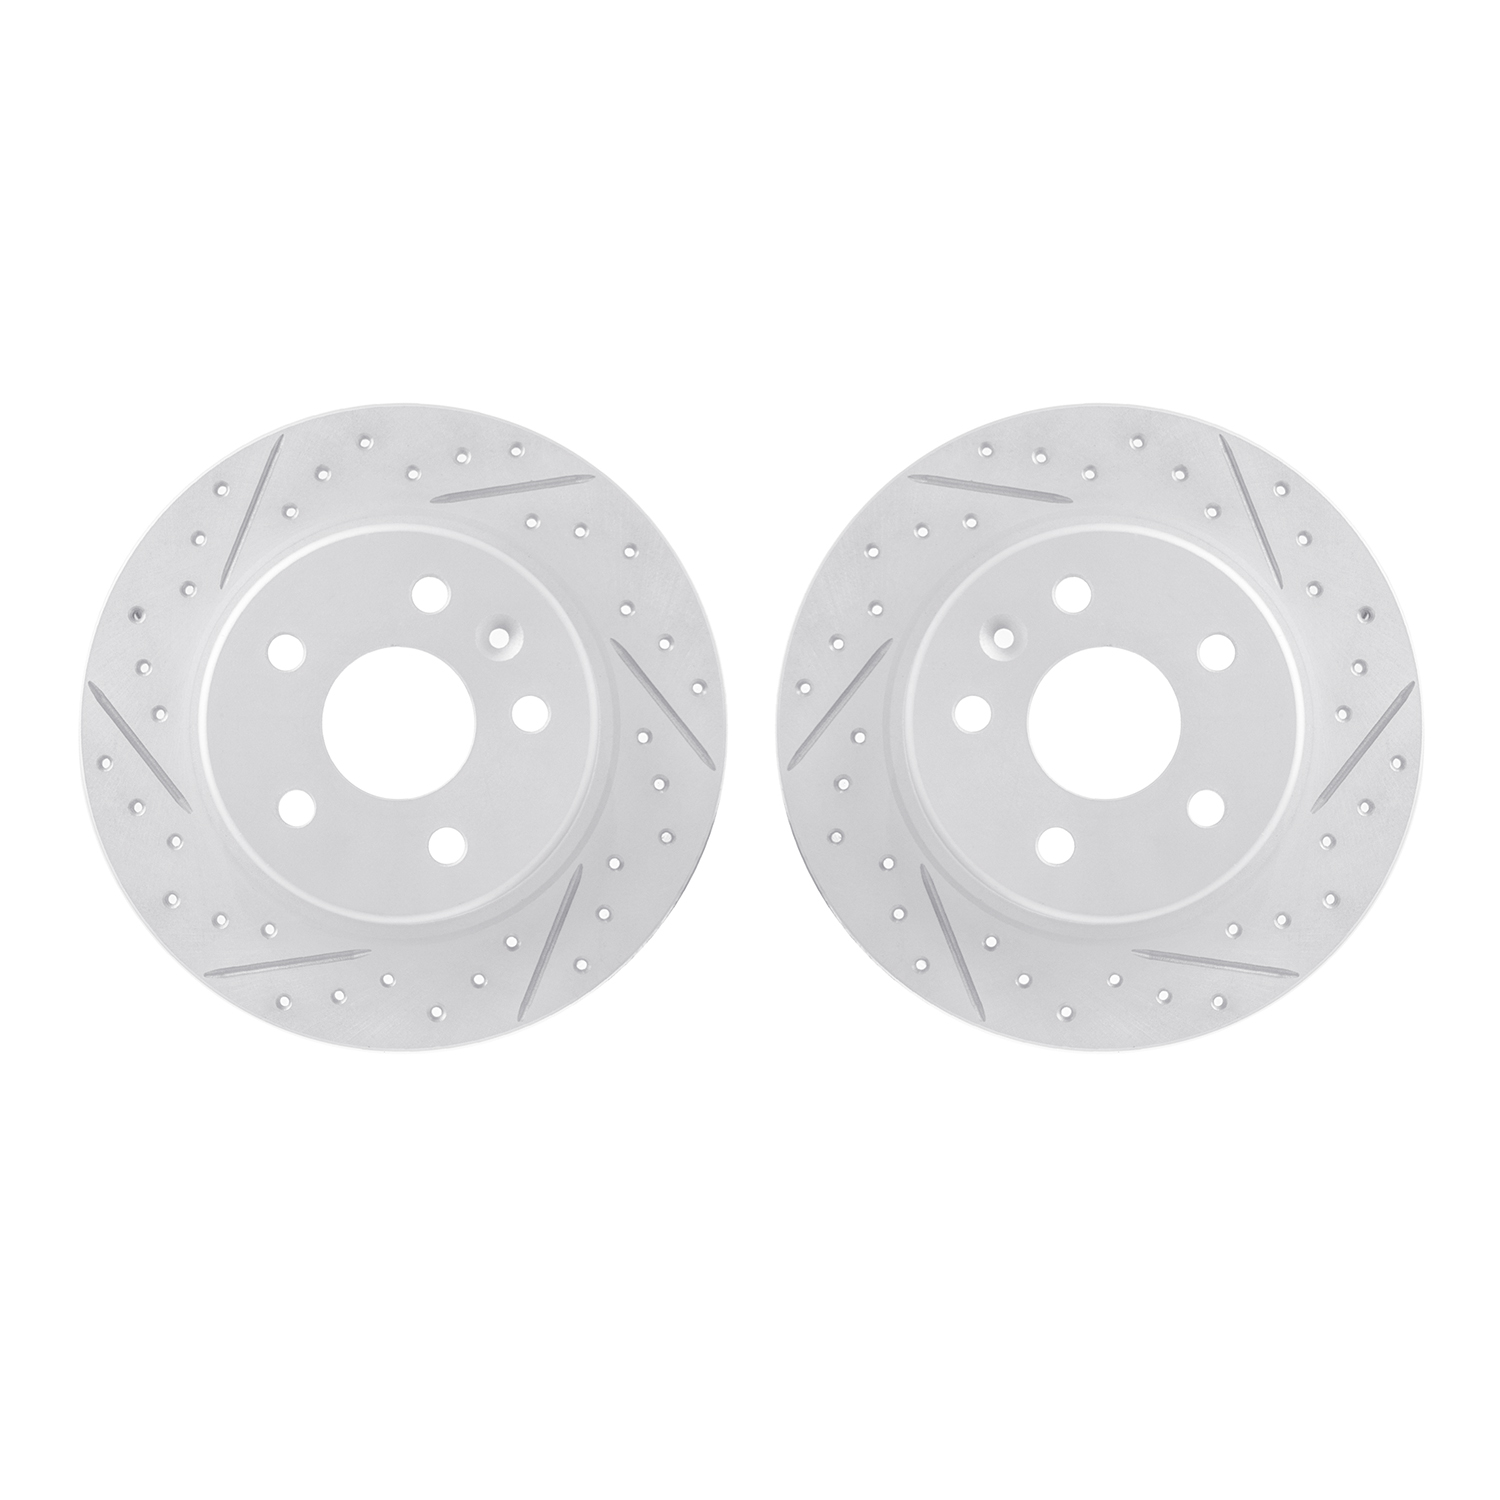 2002-47036 Geoperformance Drilled/Slotted Brake Rotors, Fits Select GM, Position: Rear